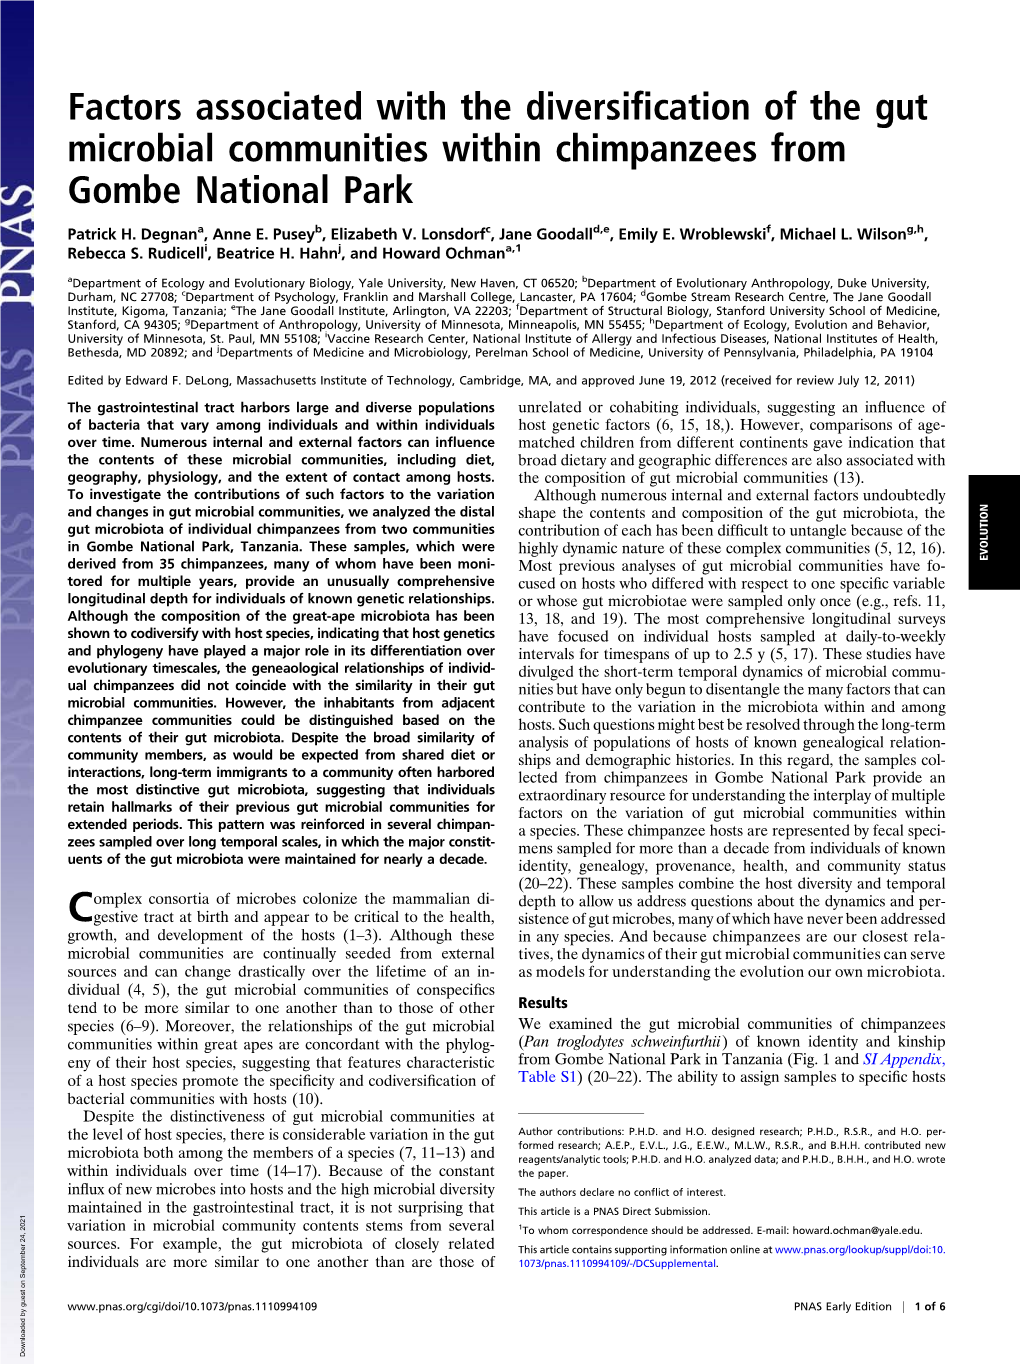 Factors Associated with the Diversification of the Gut Microbial Communities Within Chimpanzees from Gombe National Park